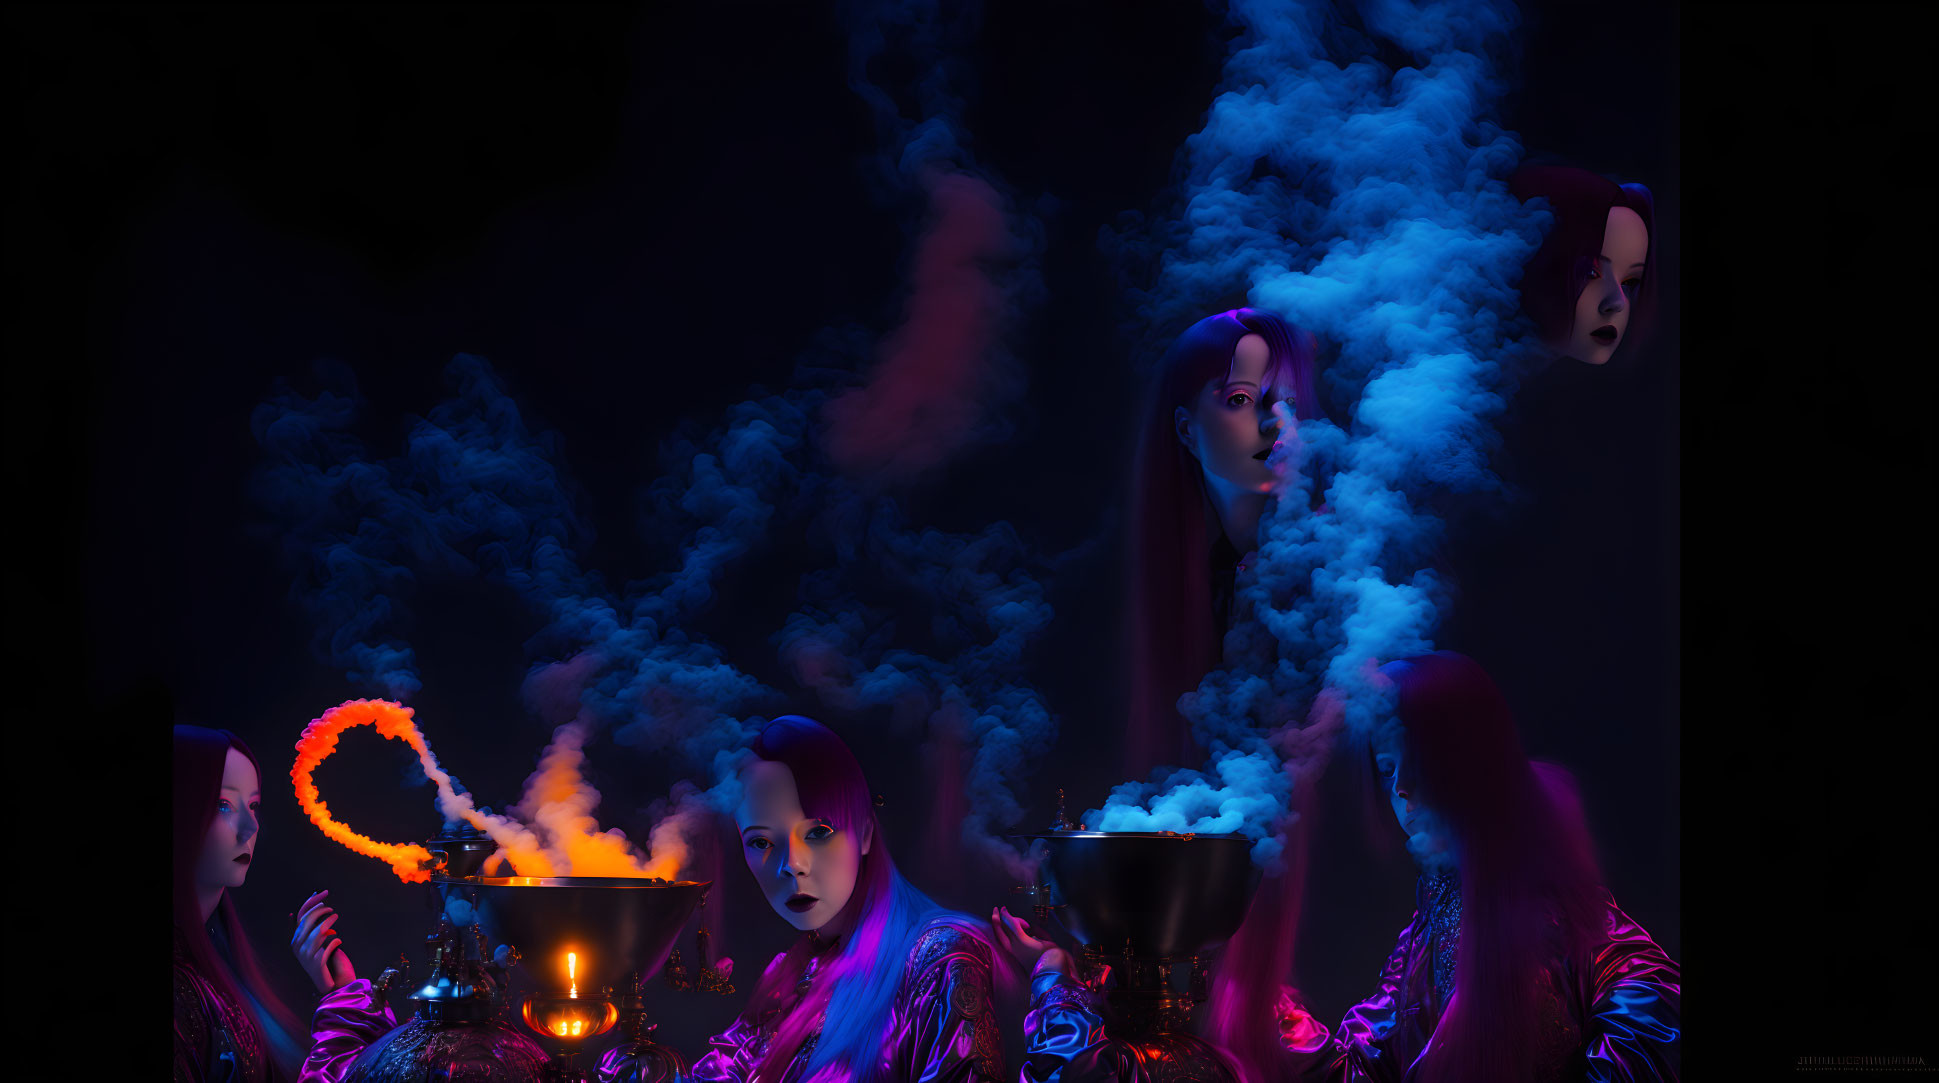 Surreal image: Multiple identical women with purple skin in dark ambiance